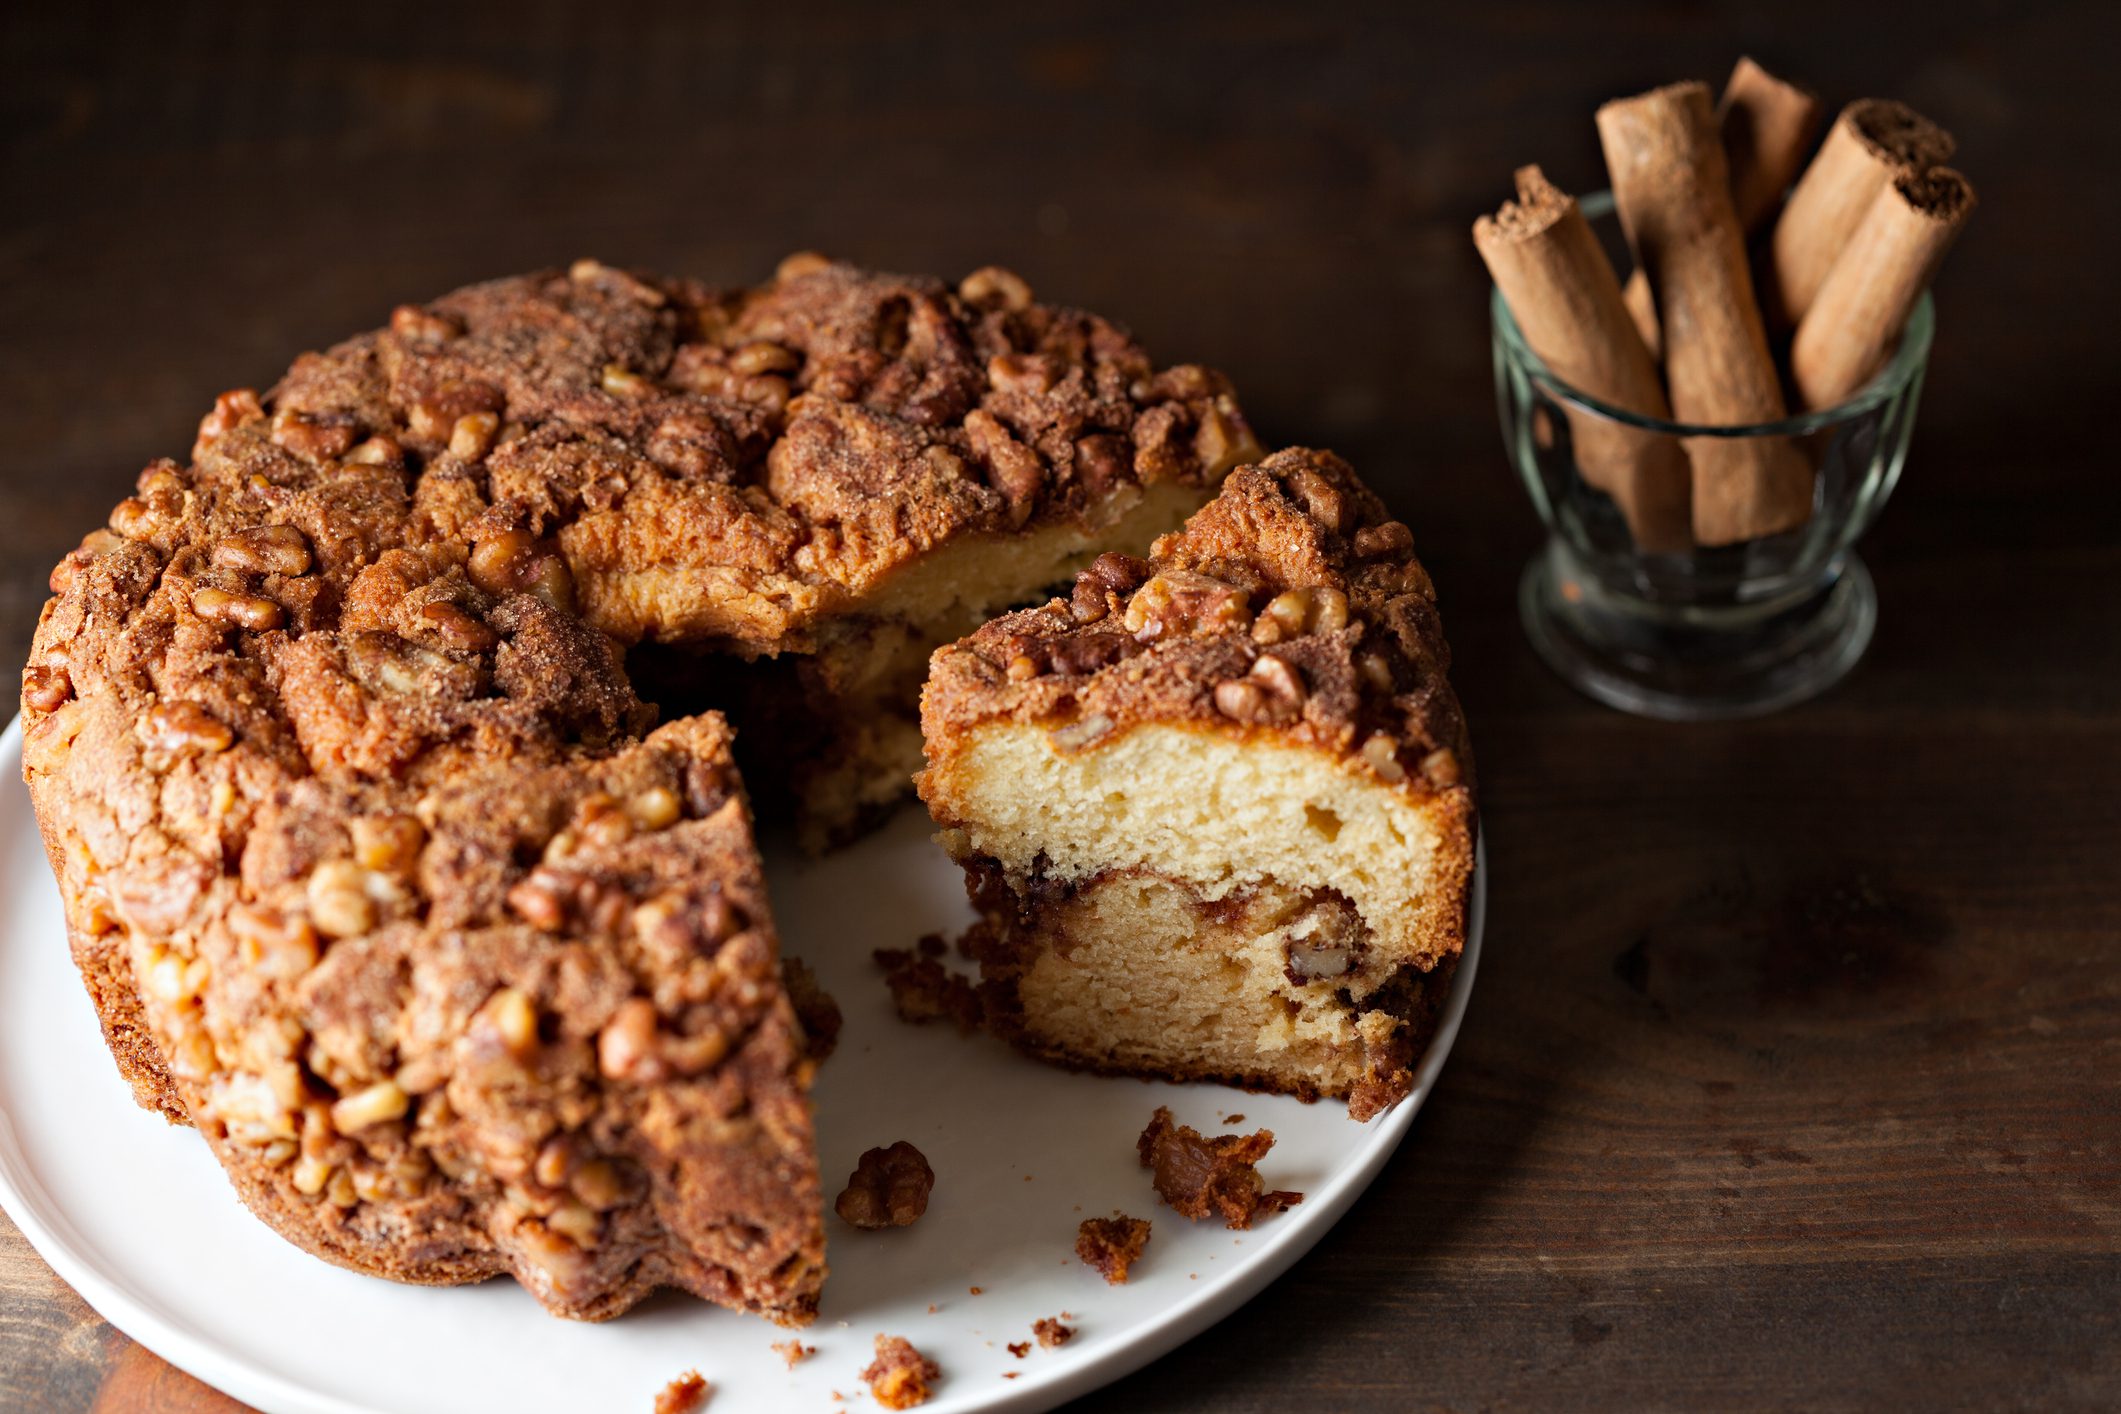 Recipe of the Month – Coffee Cake!